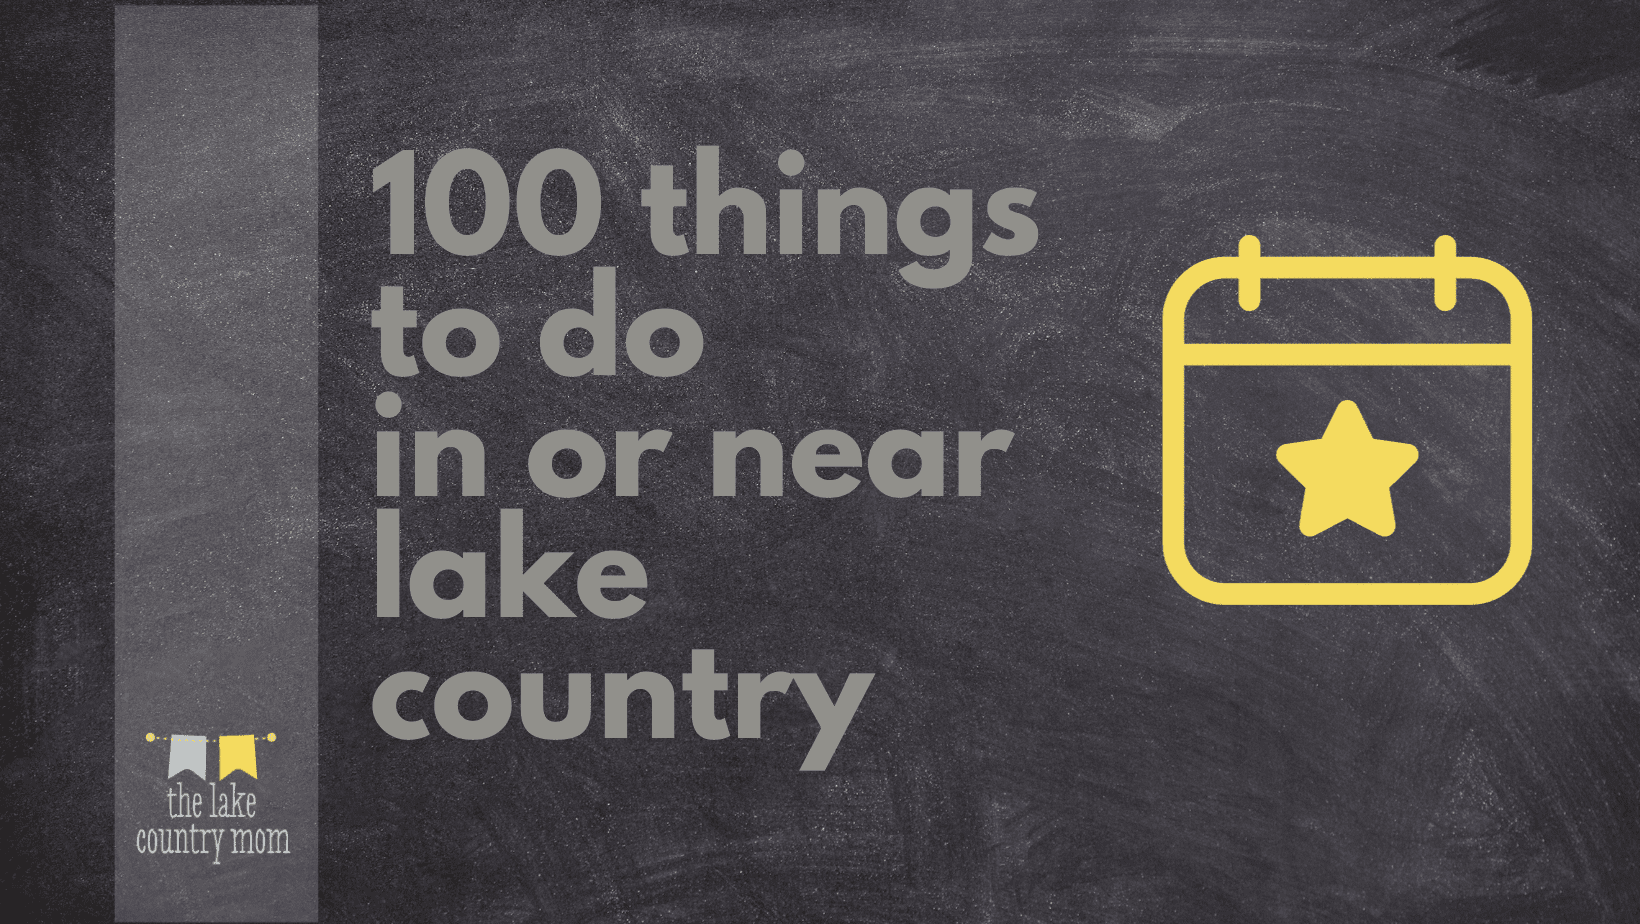 Discover Lake Country: 100 family-friendly ideas